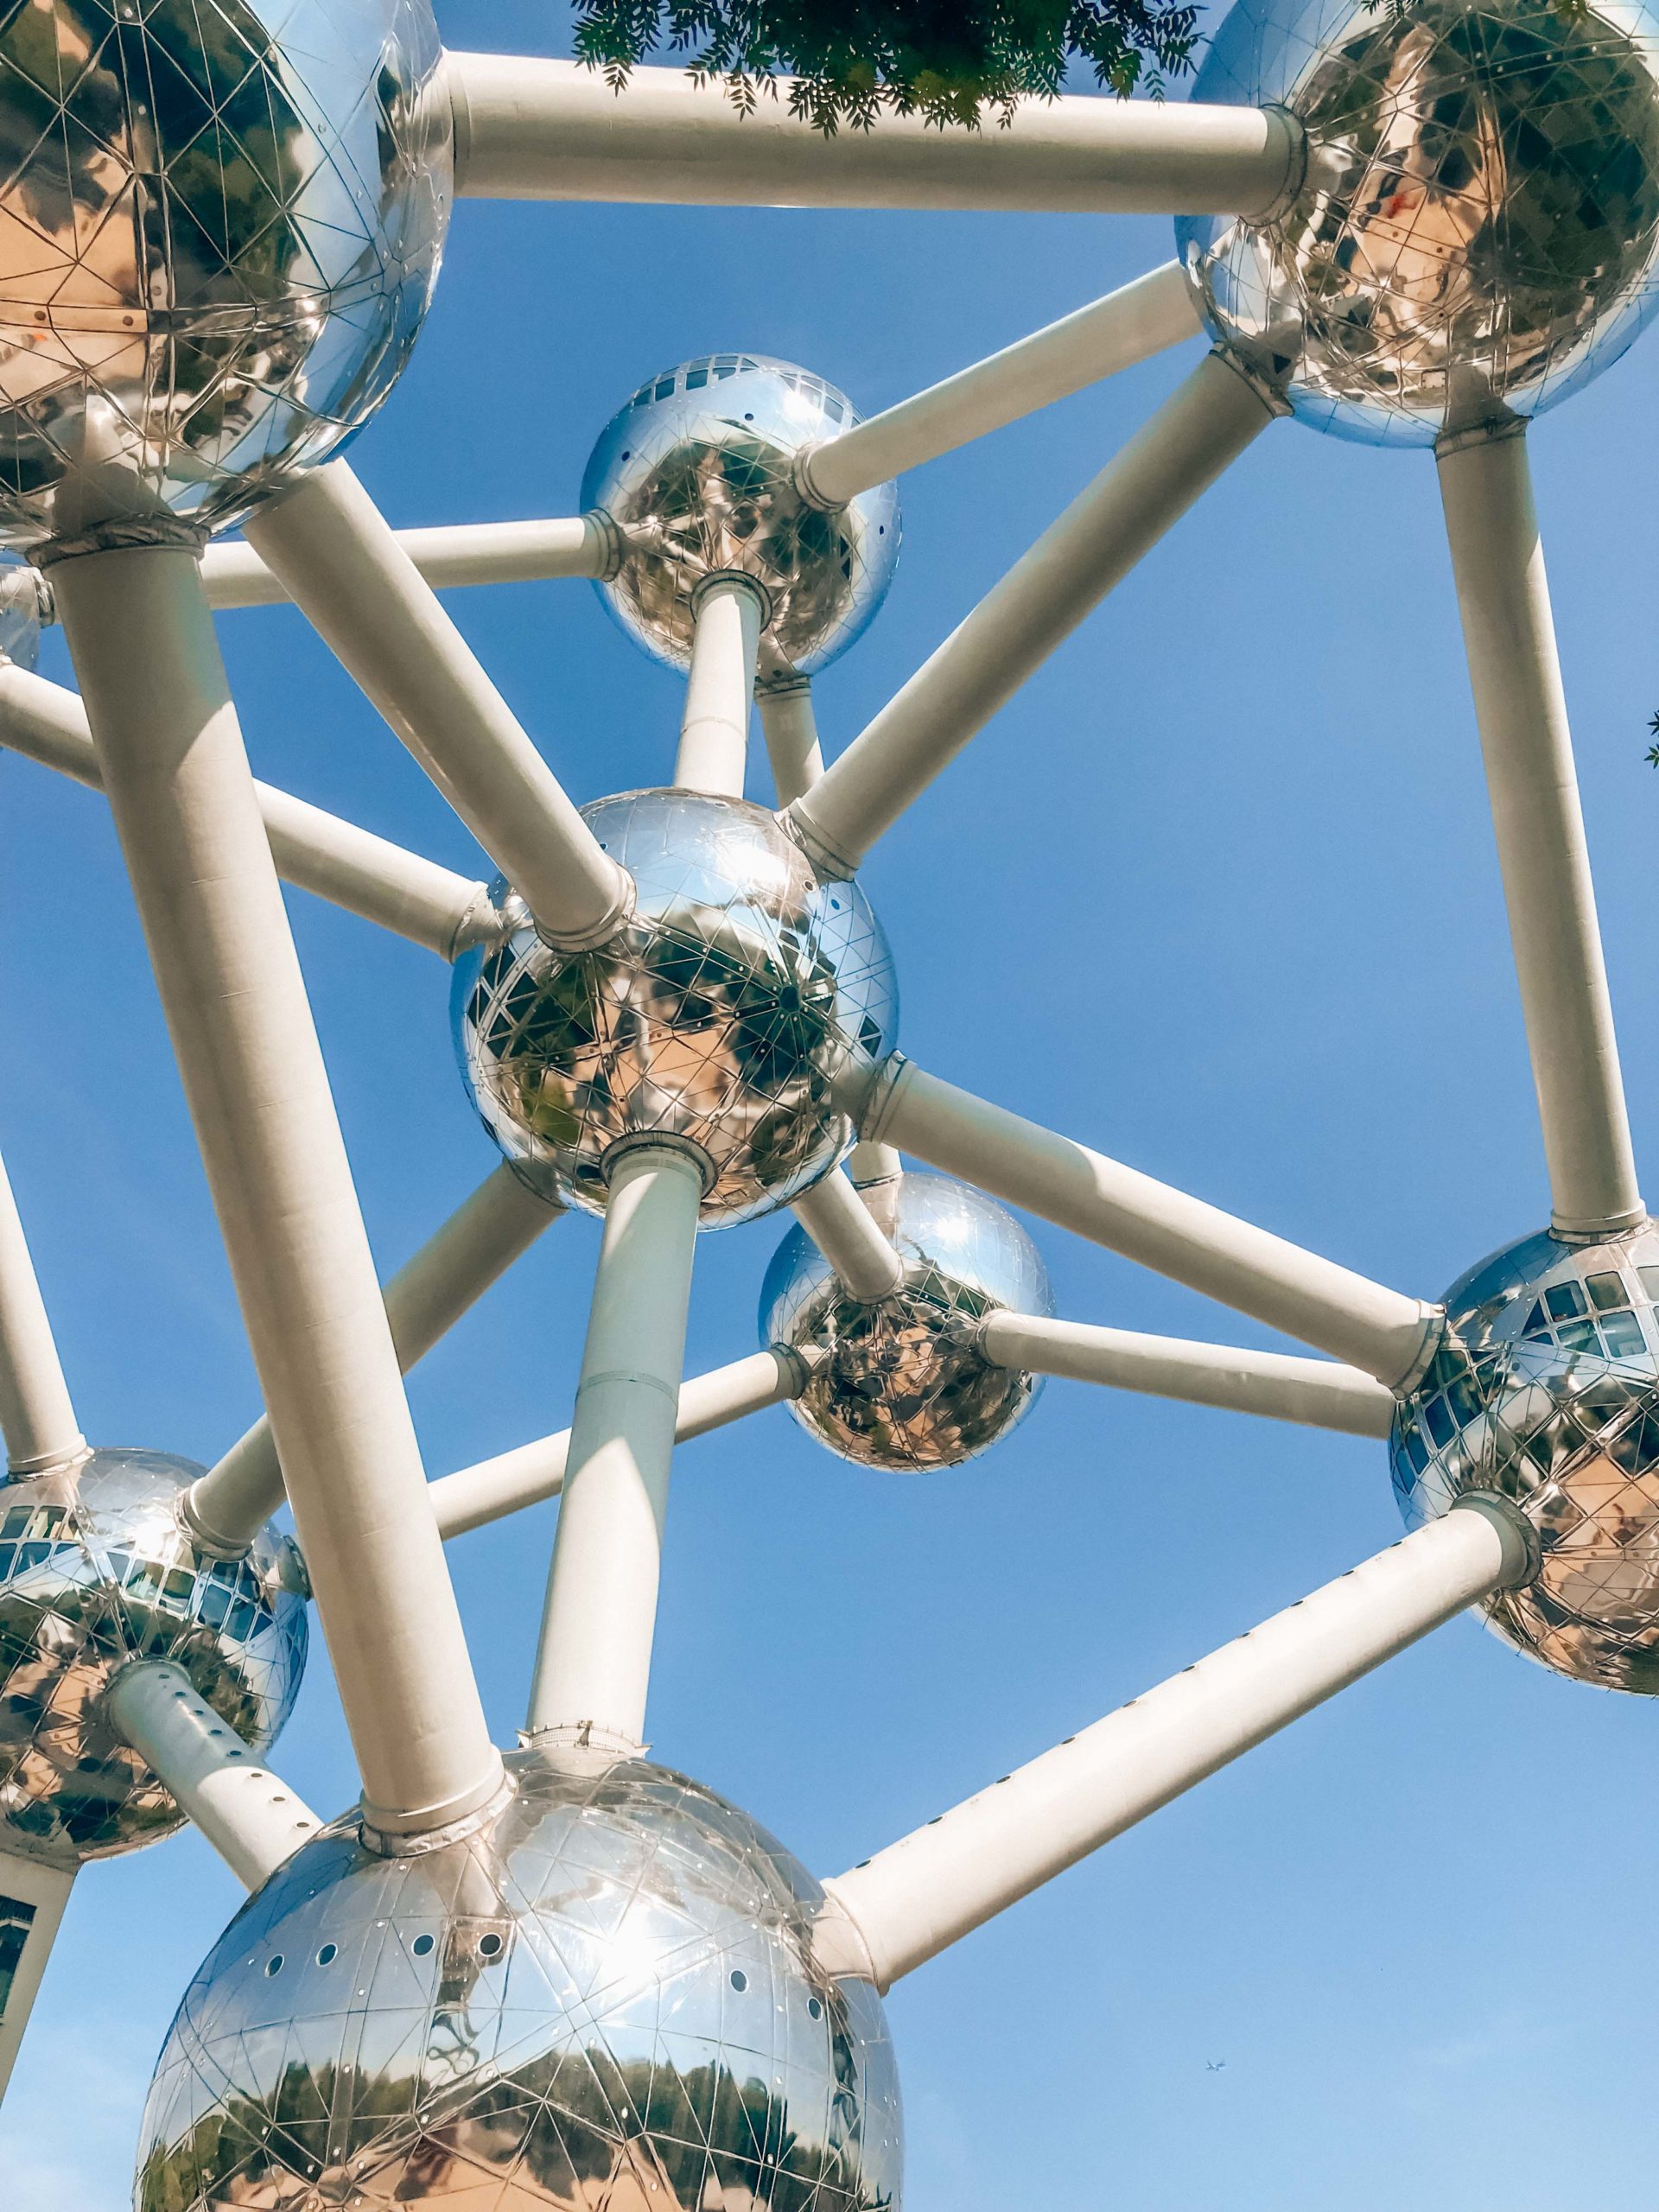 Visit the Atomium during your weekend in Brussels